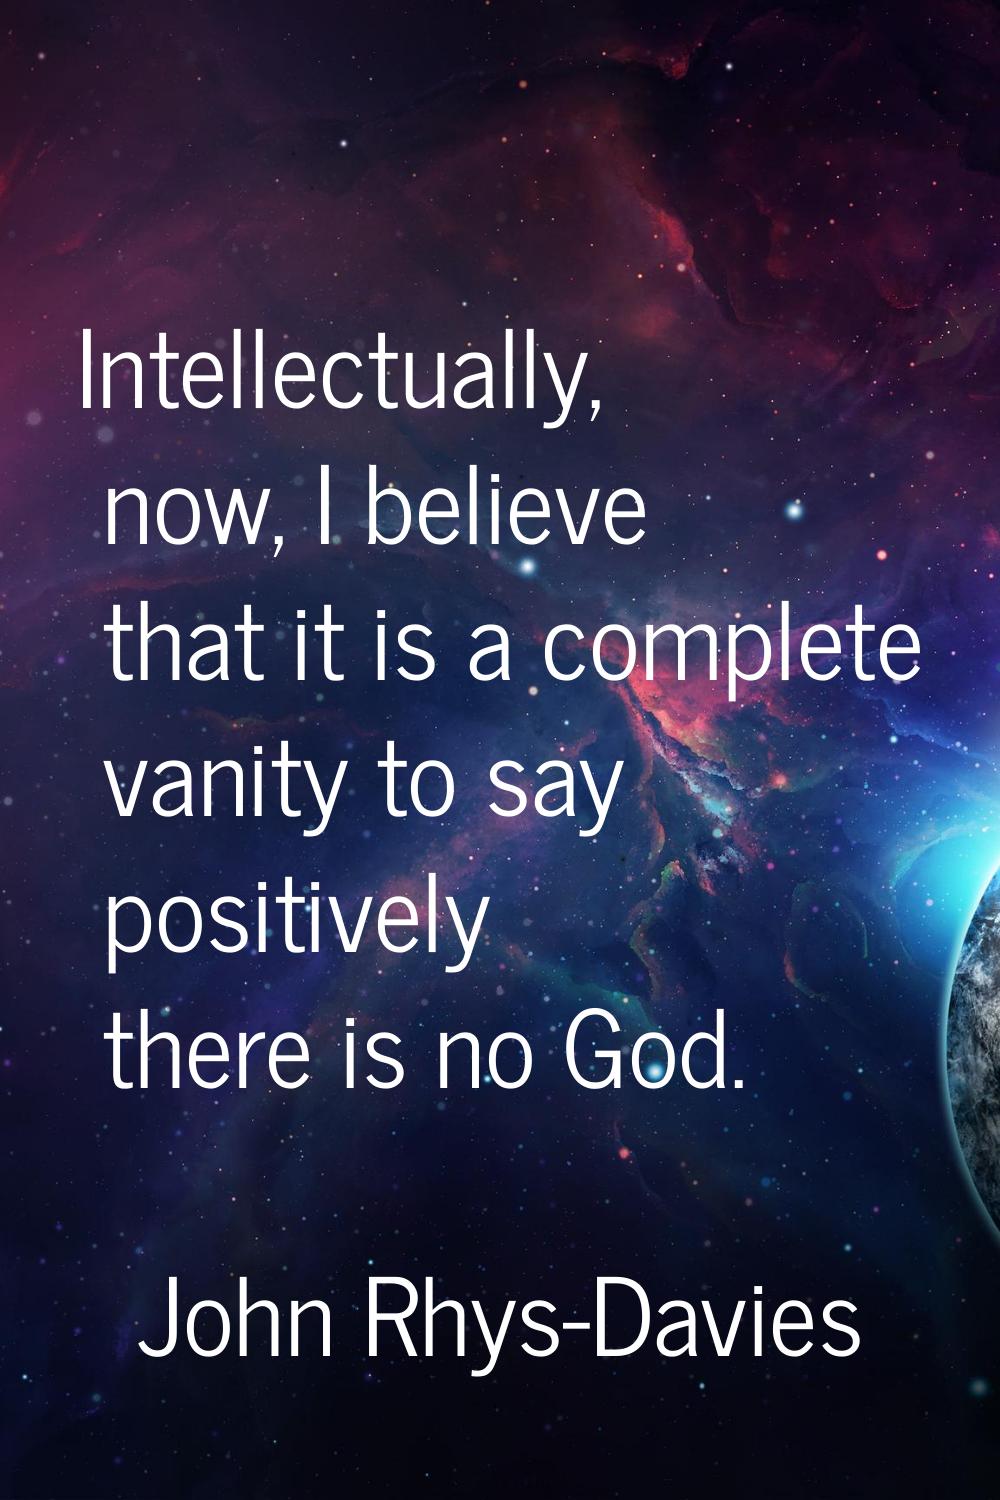 Intellectually, now, I believe that it is a complete vanity to say positively there is no God.